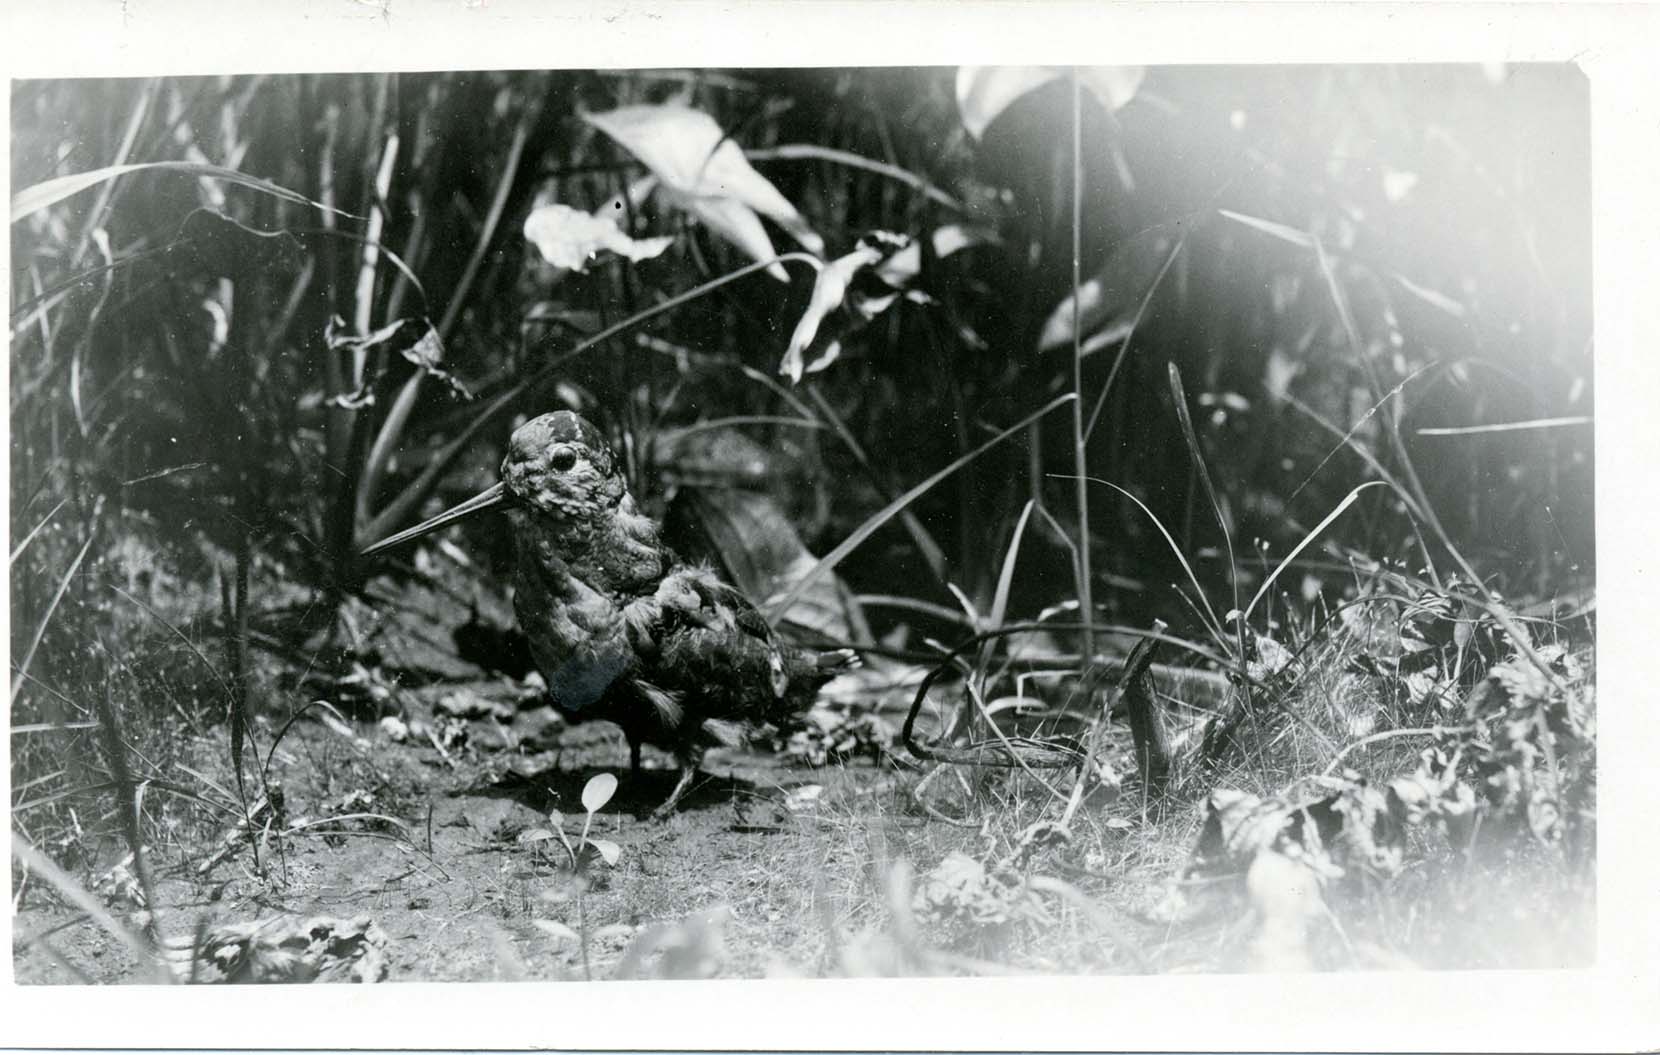 Photograph of a Woodcock mounted specimen